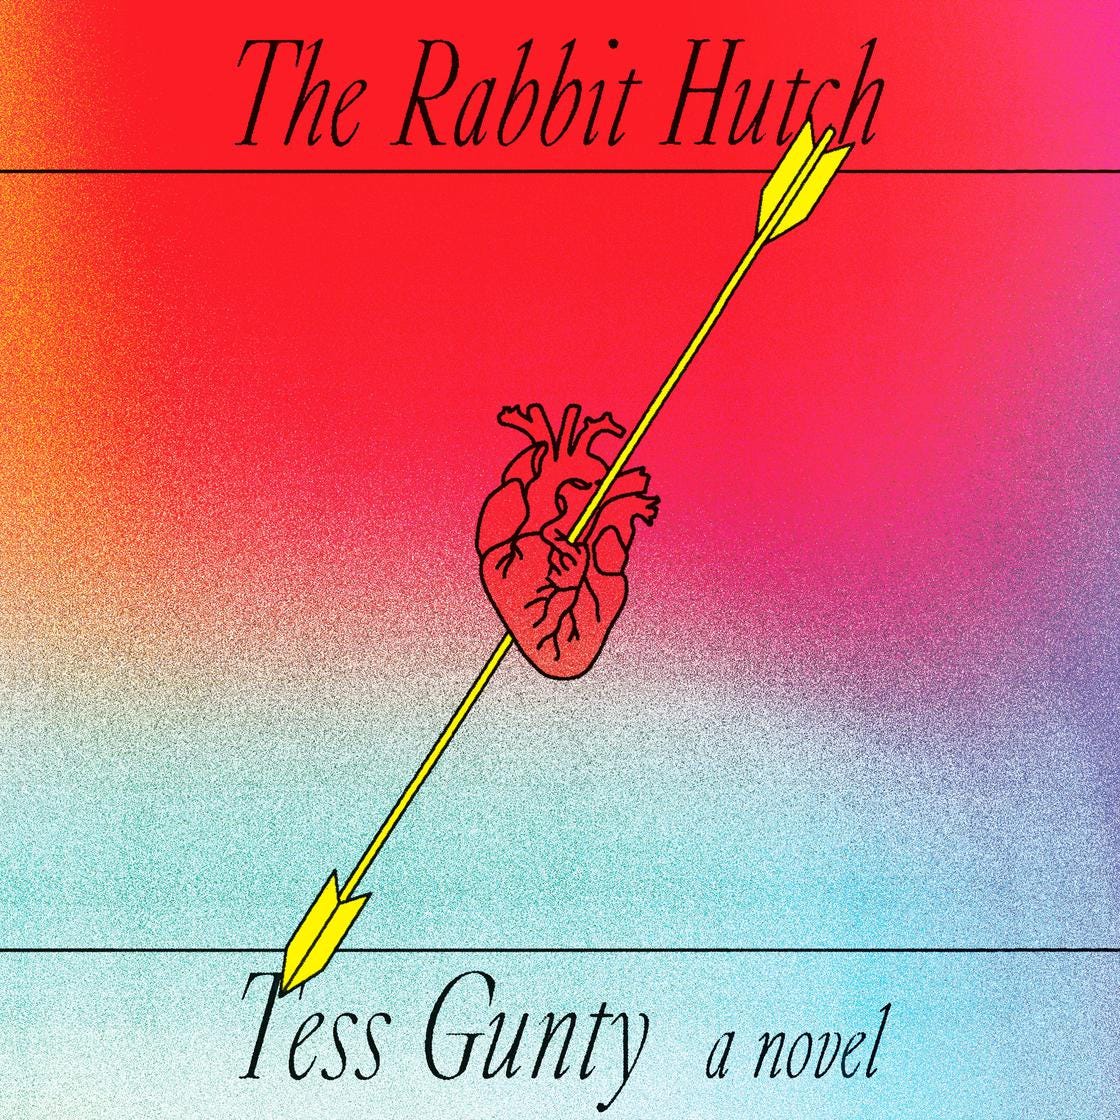 Audiobook cover of The Rabbit Hutch.